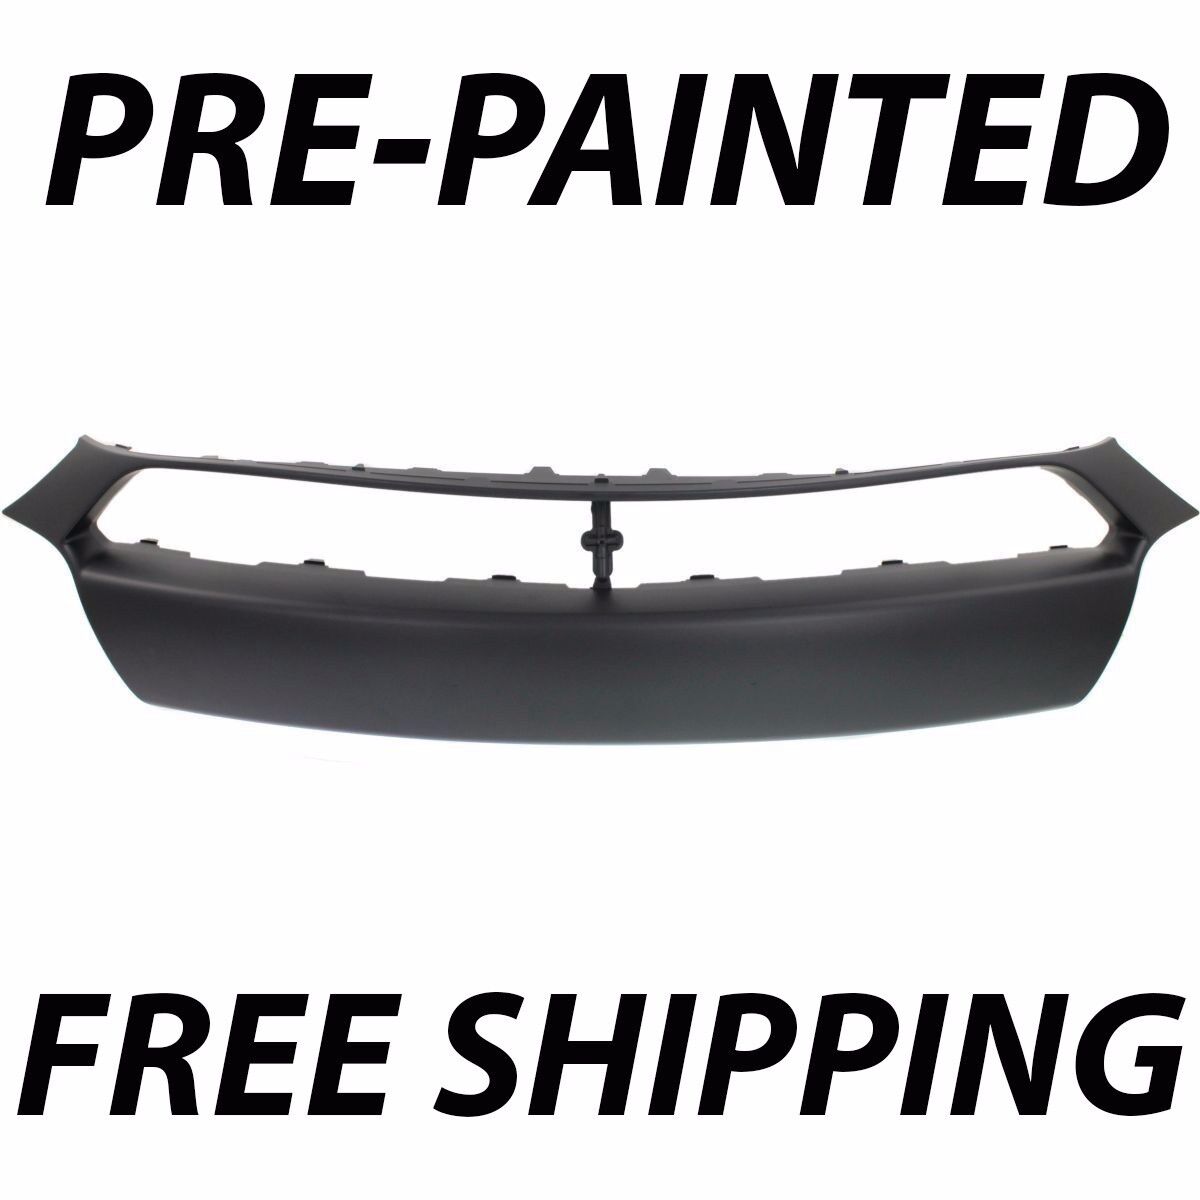 NEW Painted to Match Center Front Bumper Grill Surround for 2013-2016 Dodge Dart